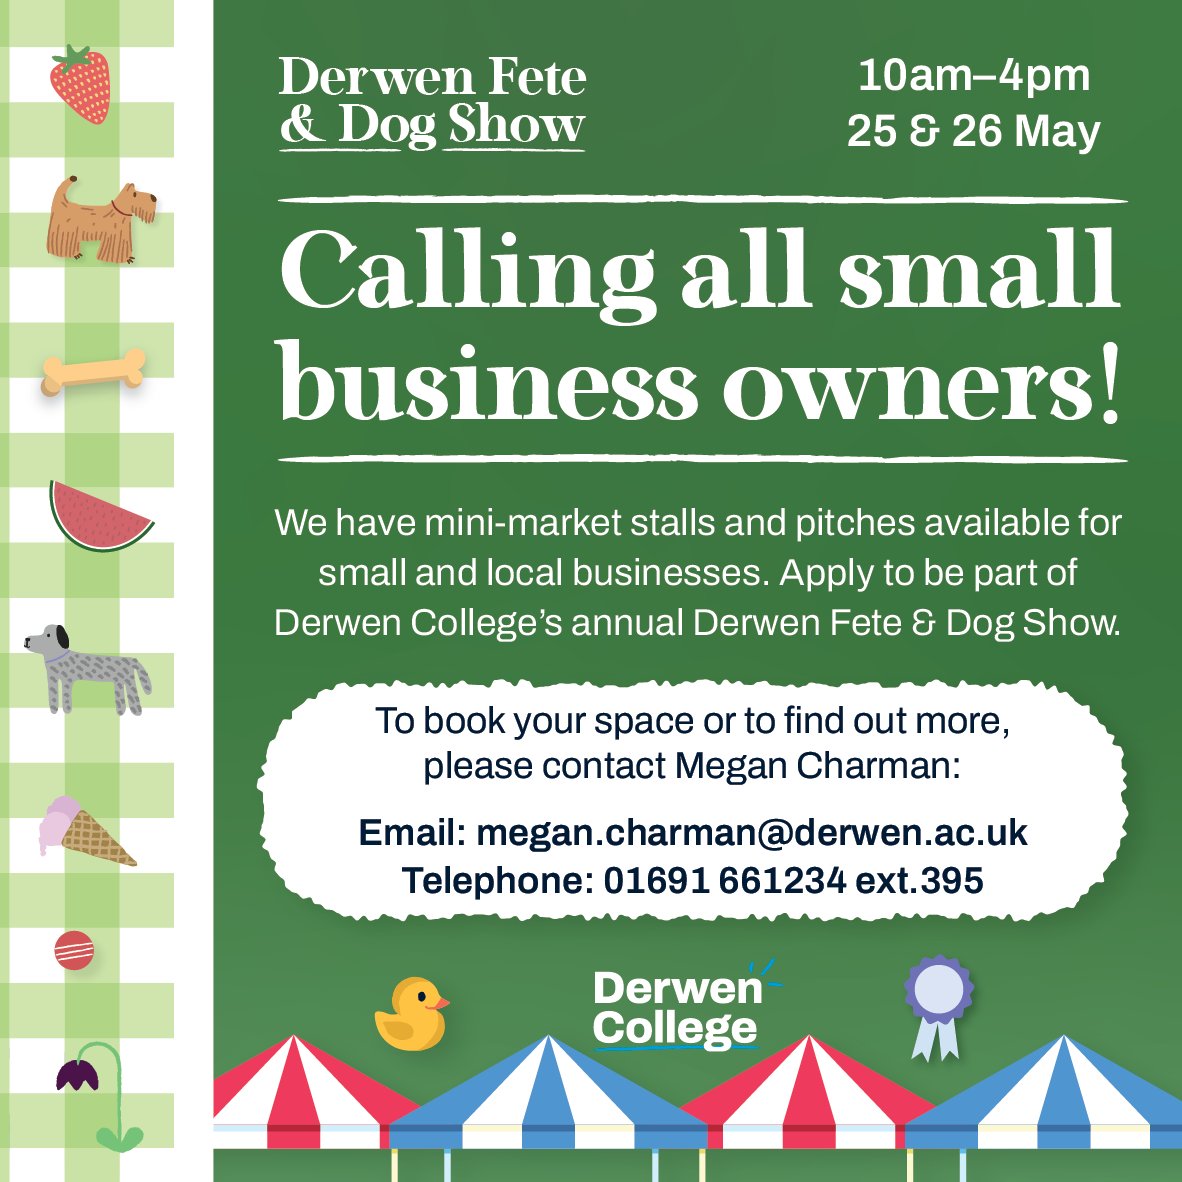 Looking to showcase your small business? Don't miss out on our annual Derwen Fete & Dog Show on the 25 and 26 of May! To book your space, please contact our Events Organiser, Megan Charman. #DerwenCollege #SEND #Derwen #SummerFete #Oswestry #Shropshire #smallbusiness